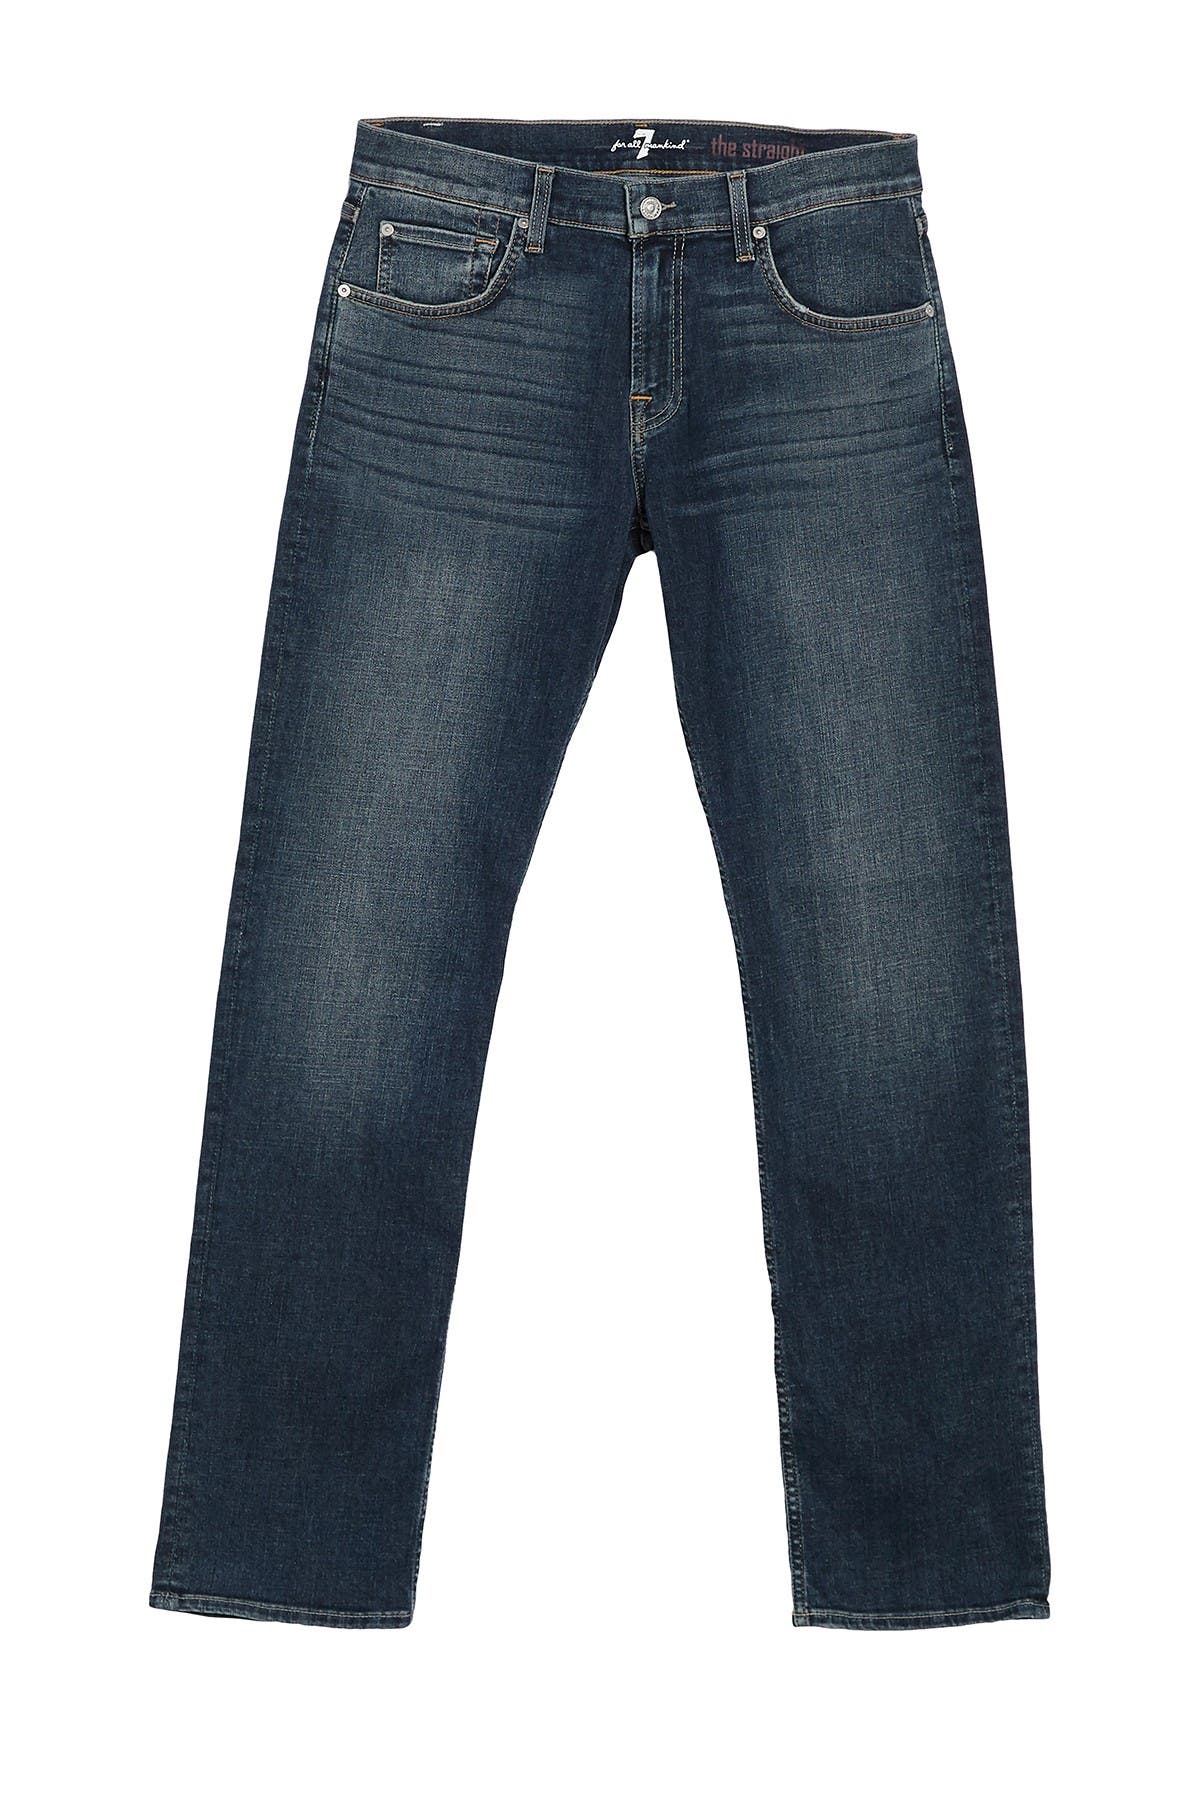 7 For All Mankind Straight Leg Jeans In Champlin